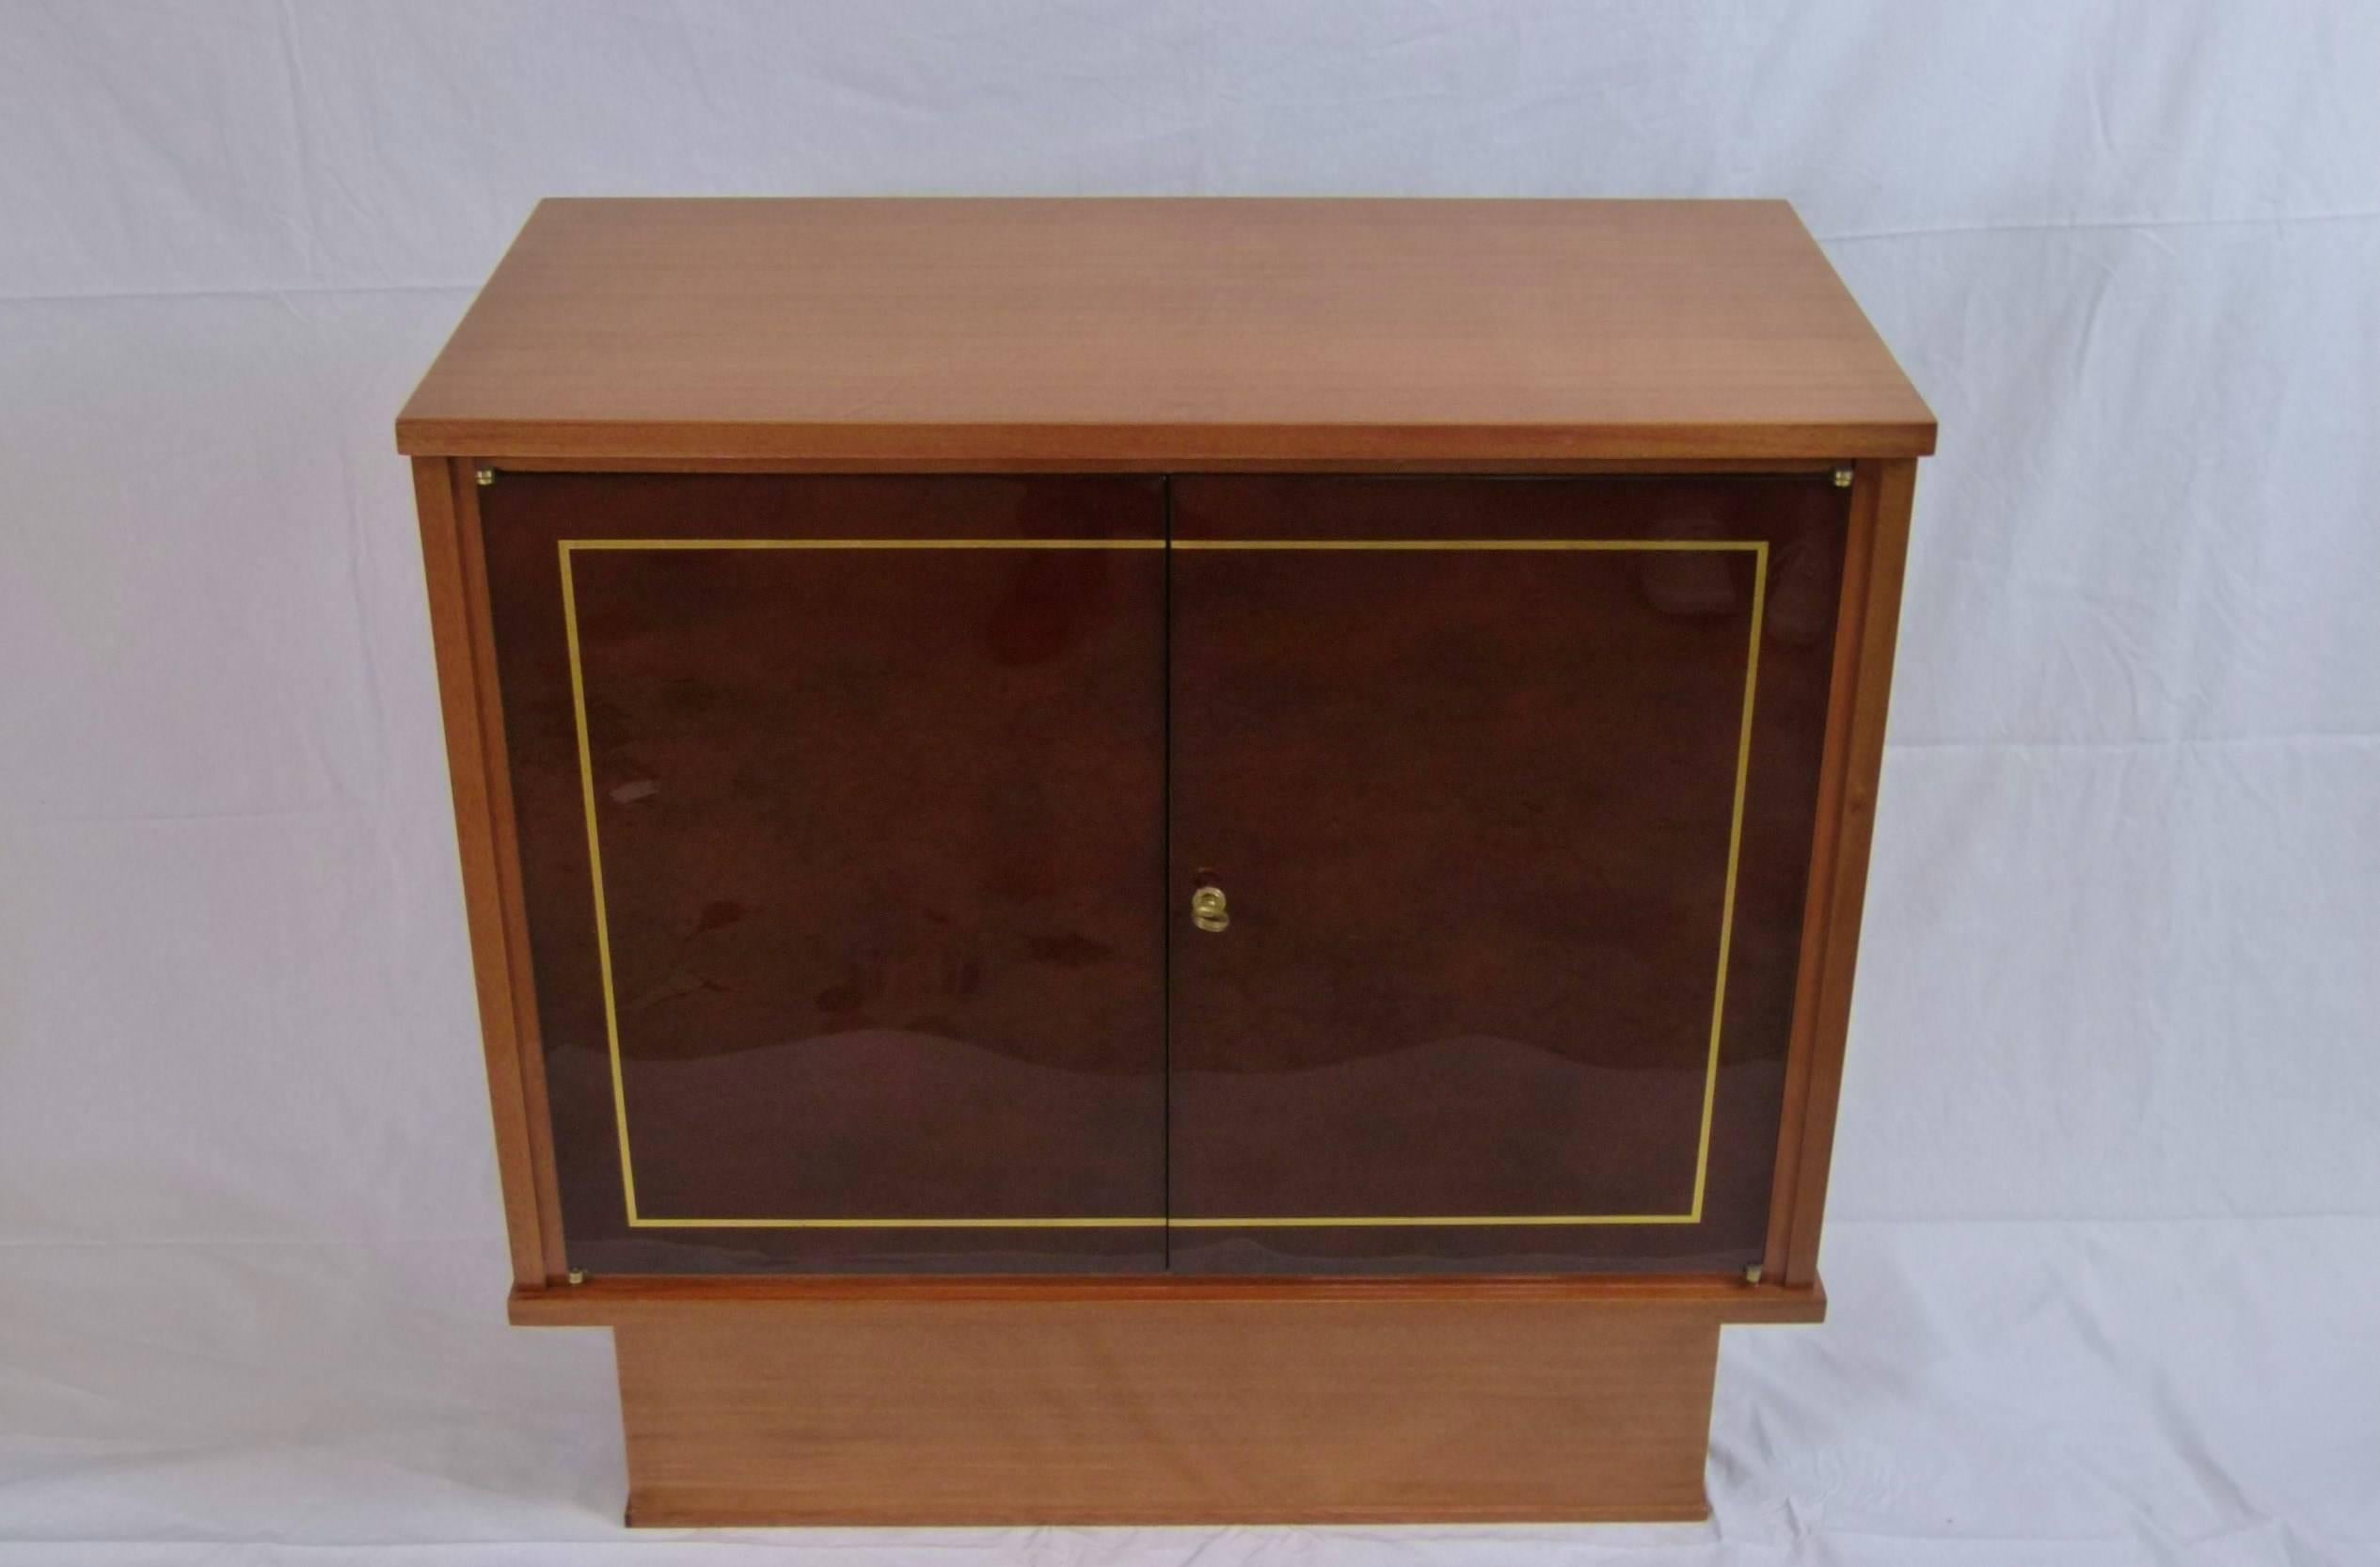 Pair of cabinets or commode, consisting of a rectangular frame in blond varnished mahogany mounted on a detached base in blond mahogany opening in the front by two doors in beaked Beka lacquer on a row of shelves in sycamore.
A leaf decor highlights